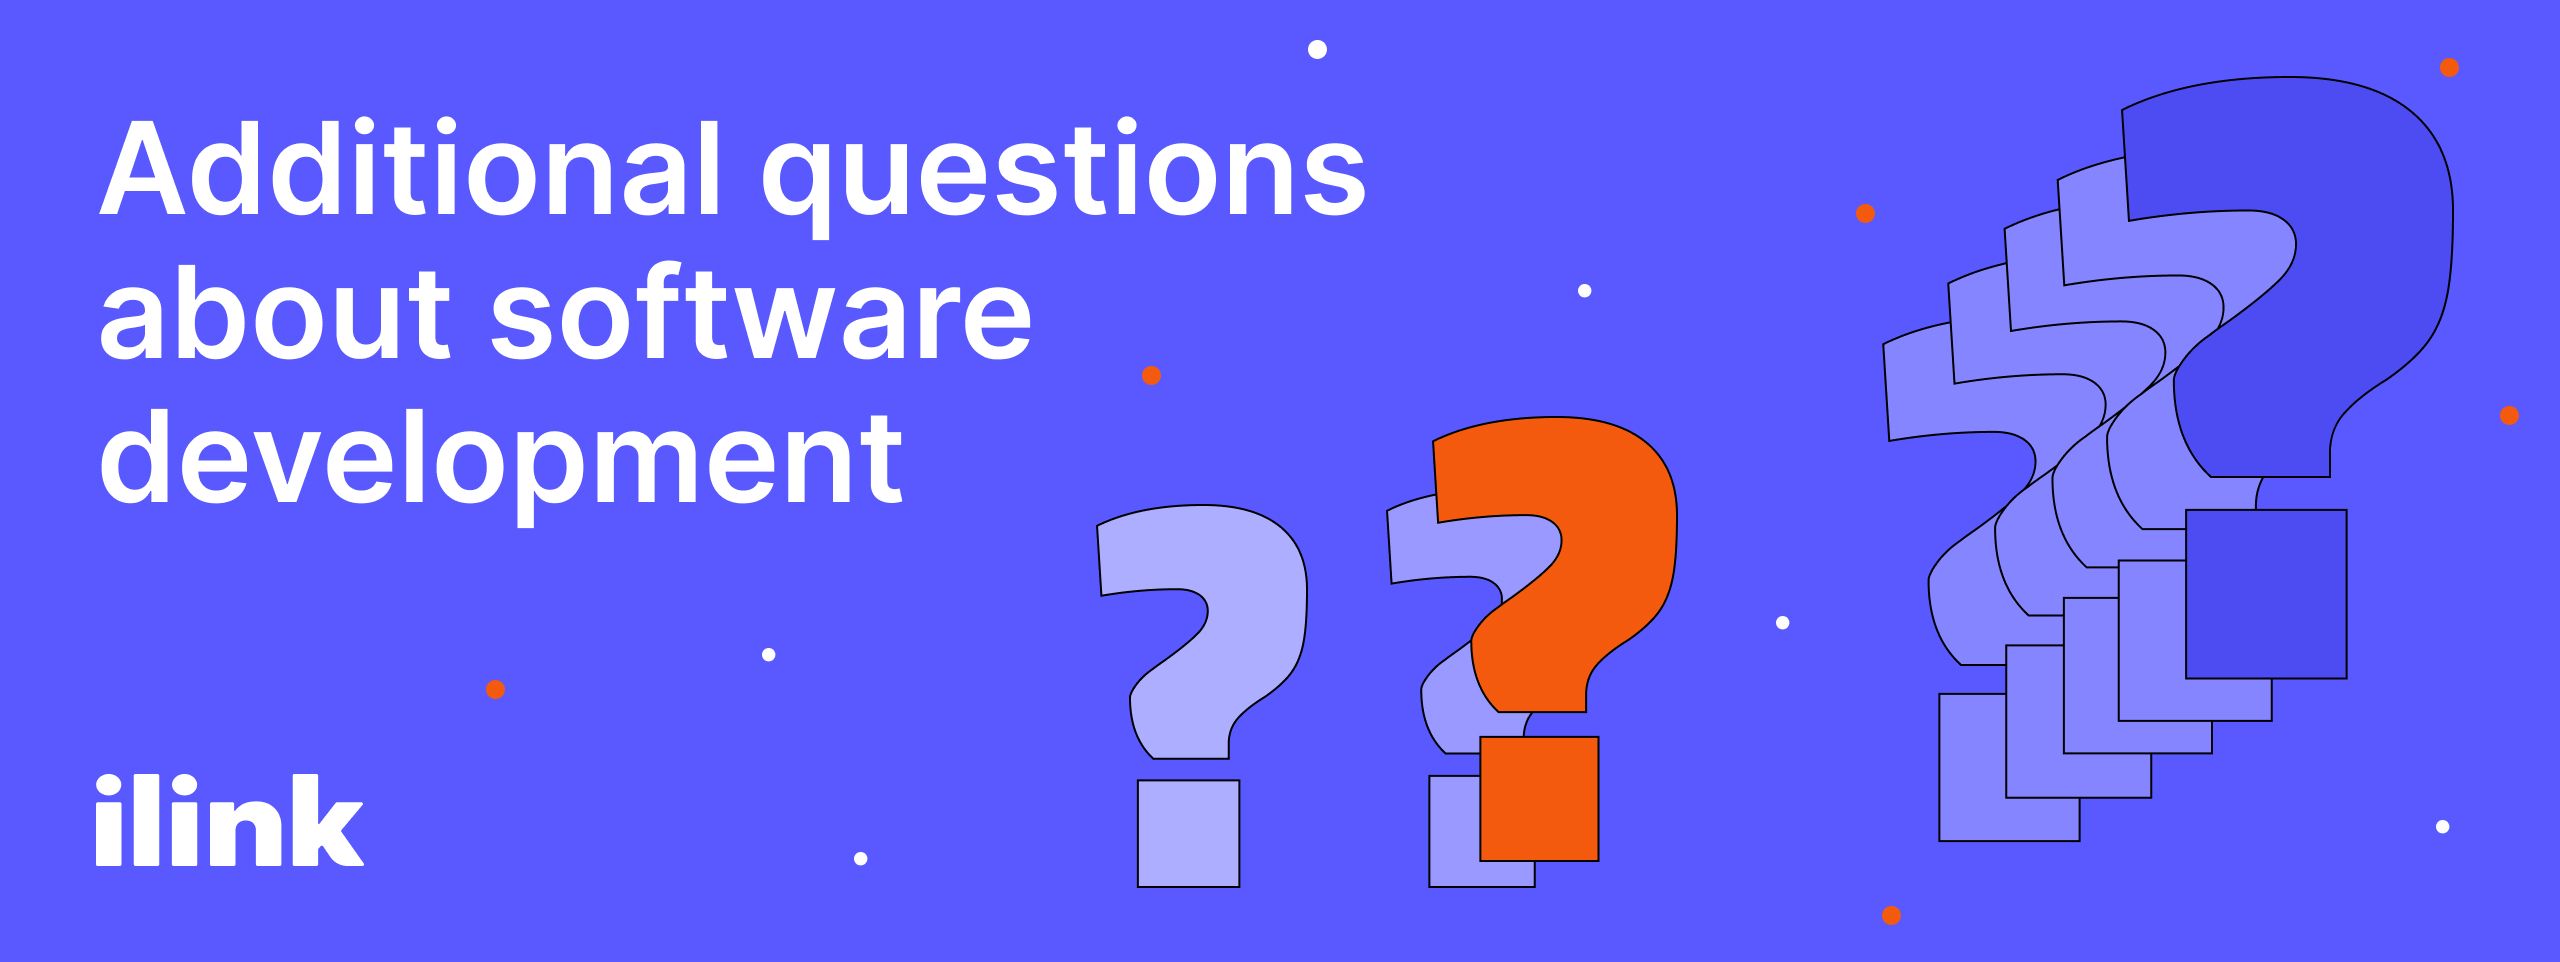 Additional questions about software development image | ilink blog